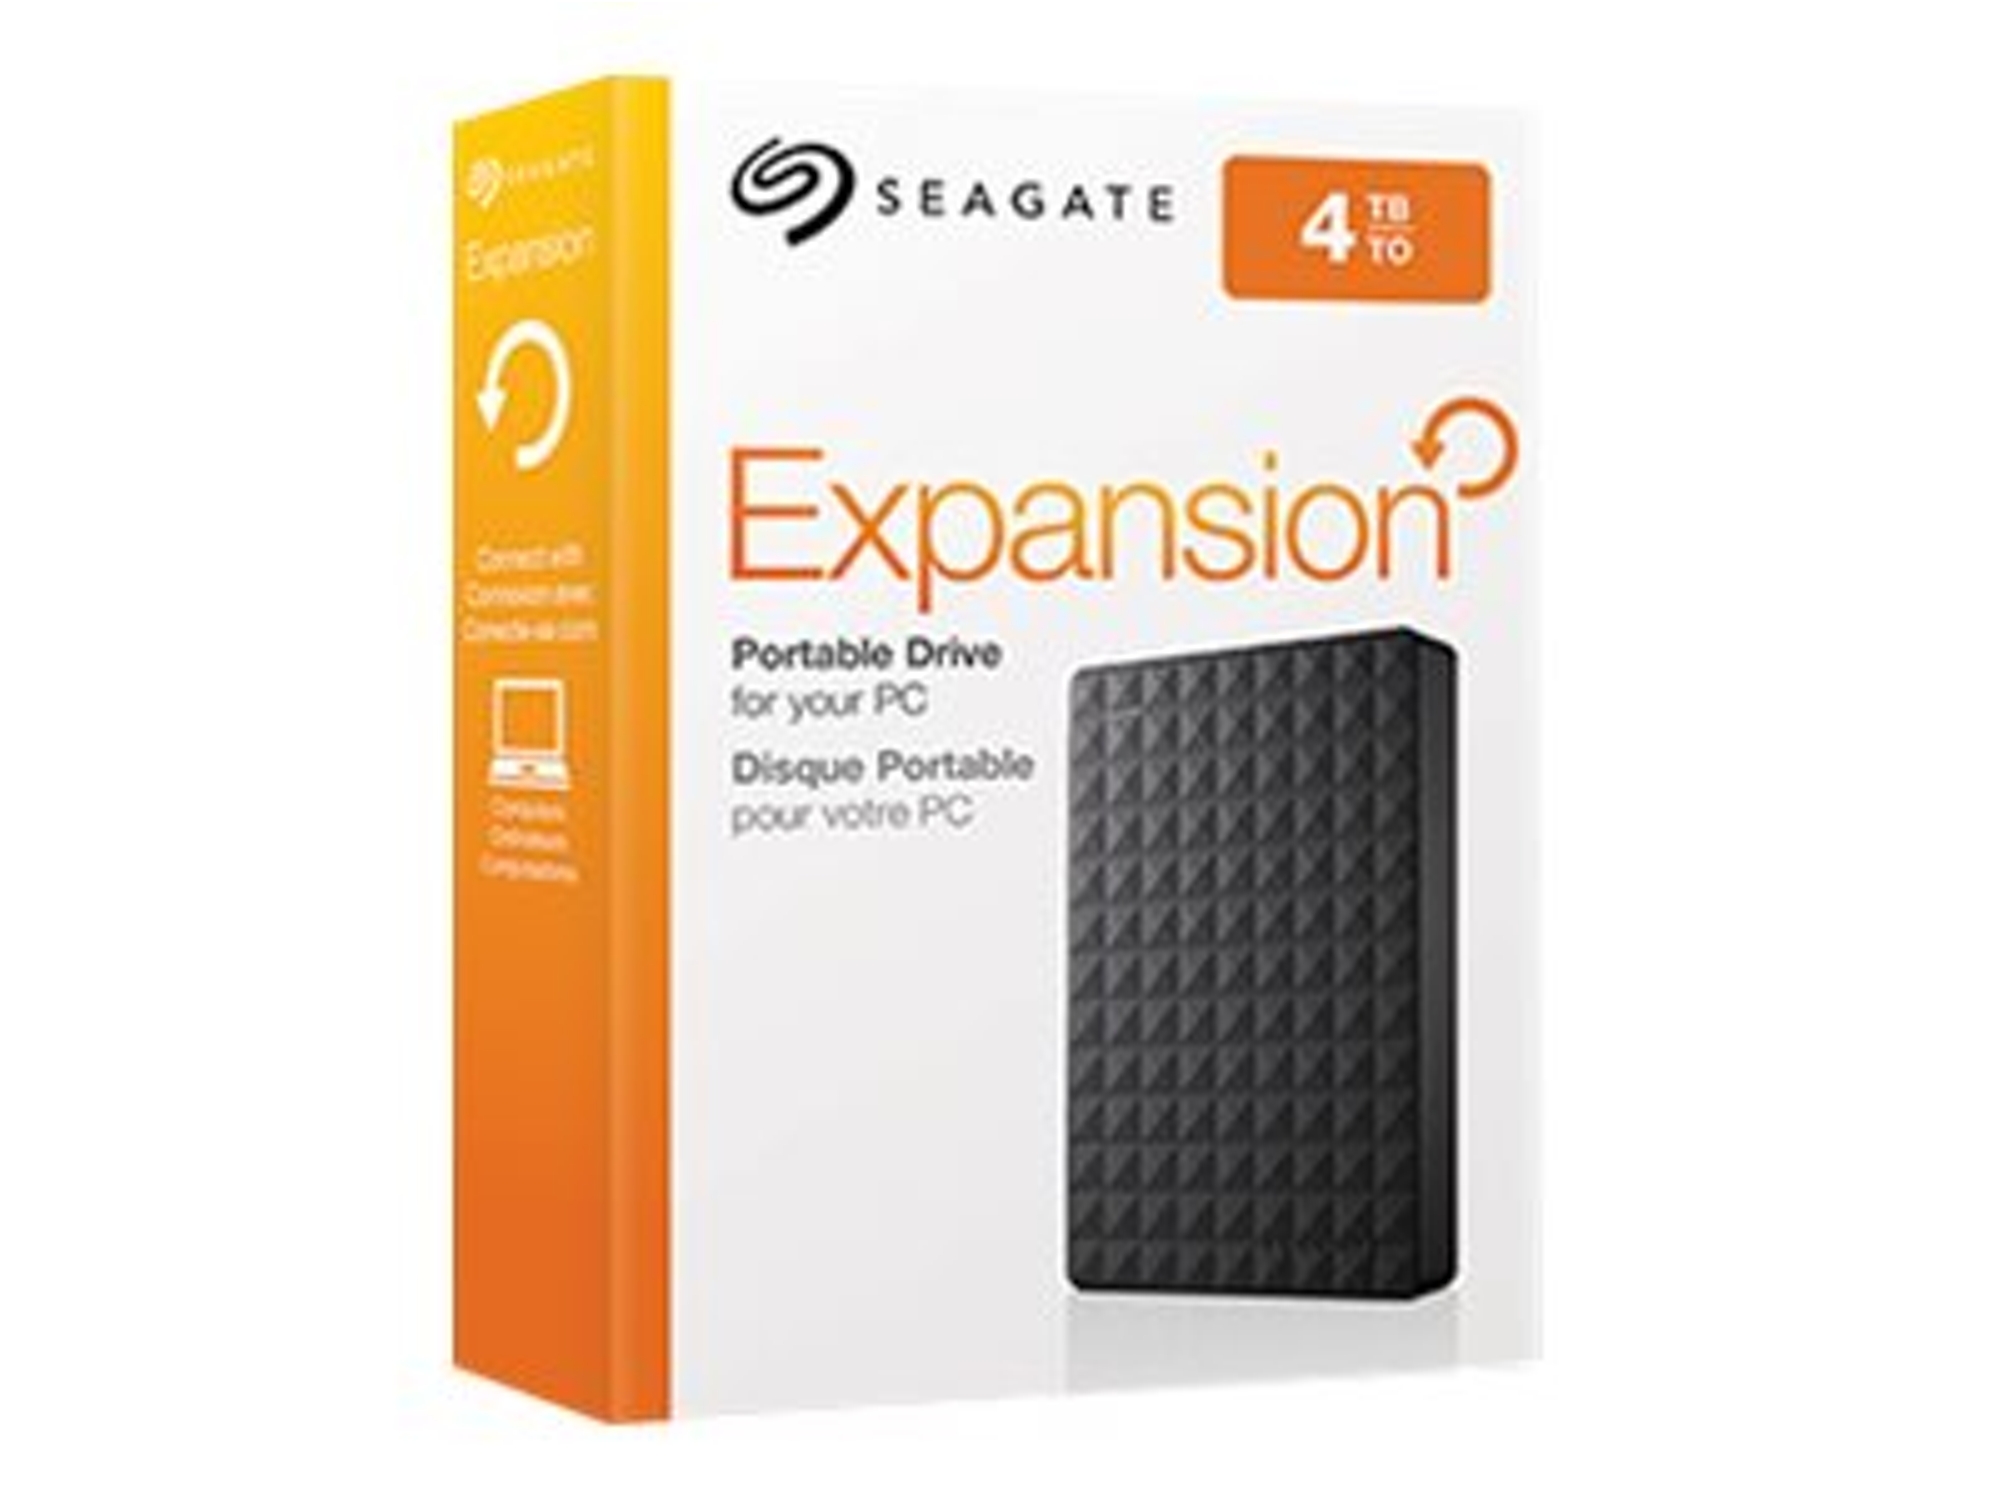 Disco HDD Externo SEAGATE Expansion Port 4 TB (Negro - 4 TB - USB 3.0)